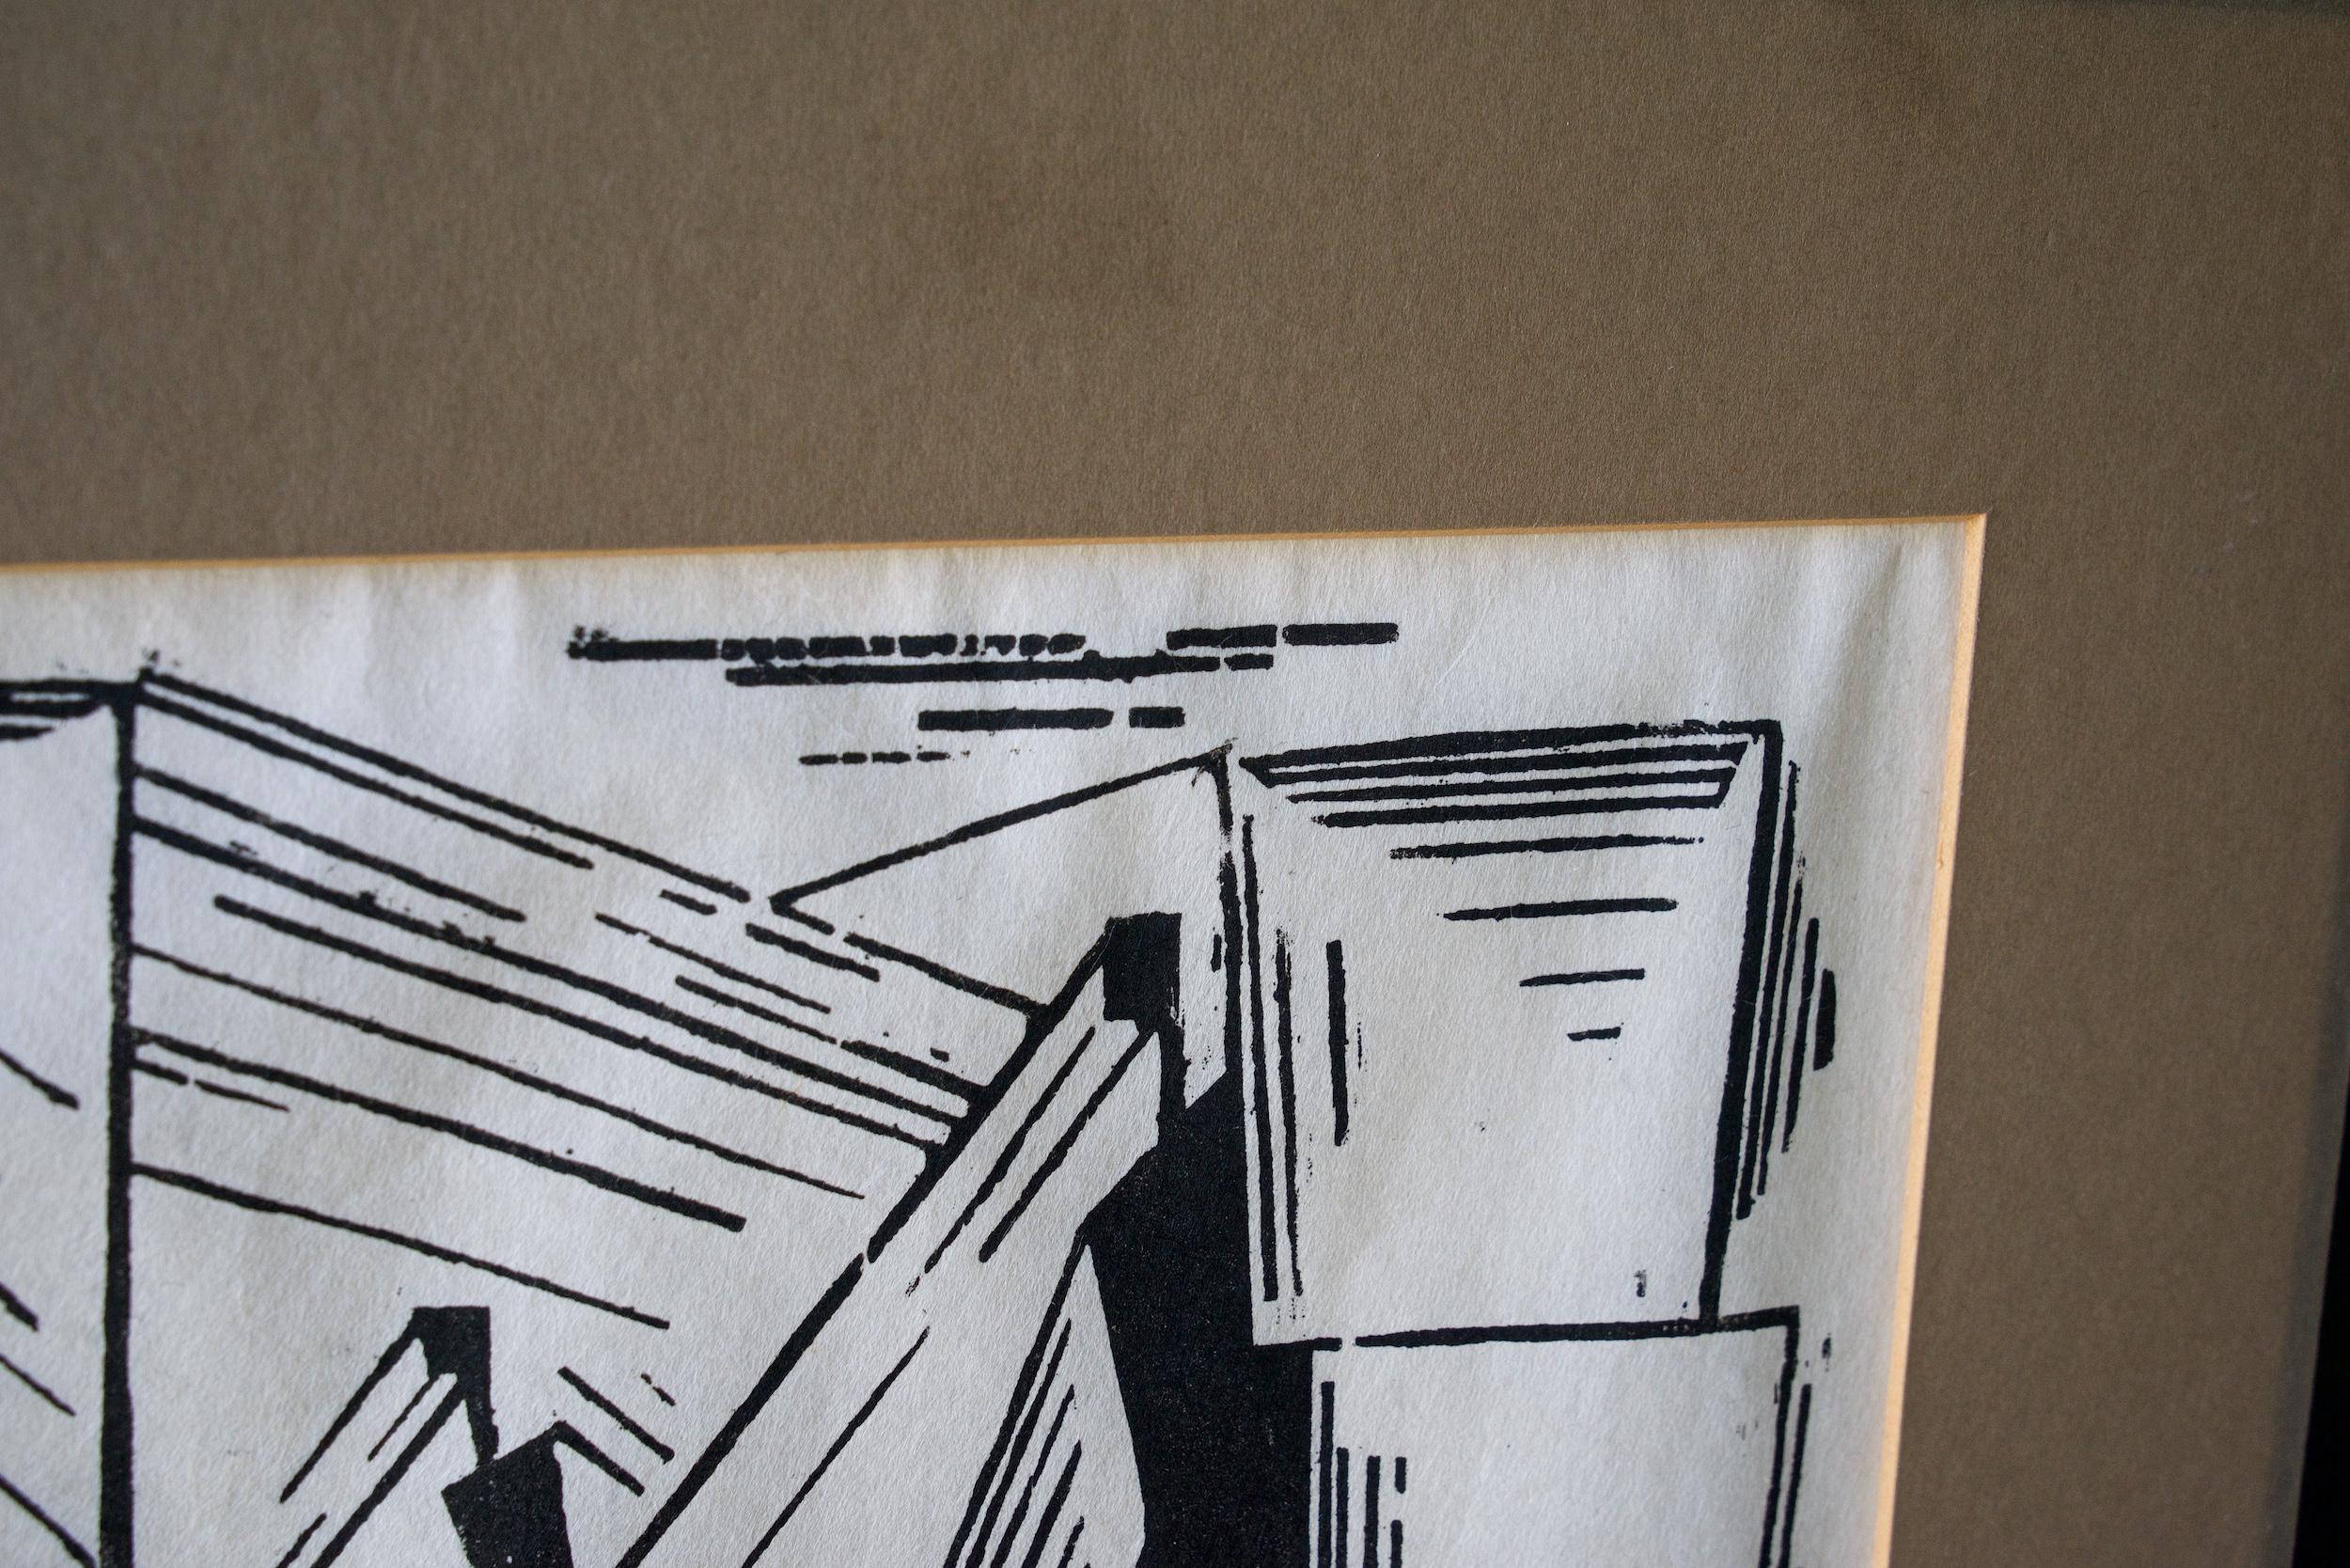 1920s Lyonel Feininger Woodcut Art Deco Cityscape Abstract Futurist Cubist Print In Fair Condition For Sale In Hyattsville, MD